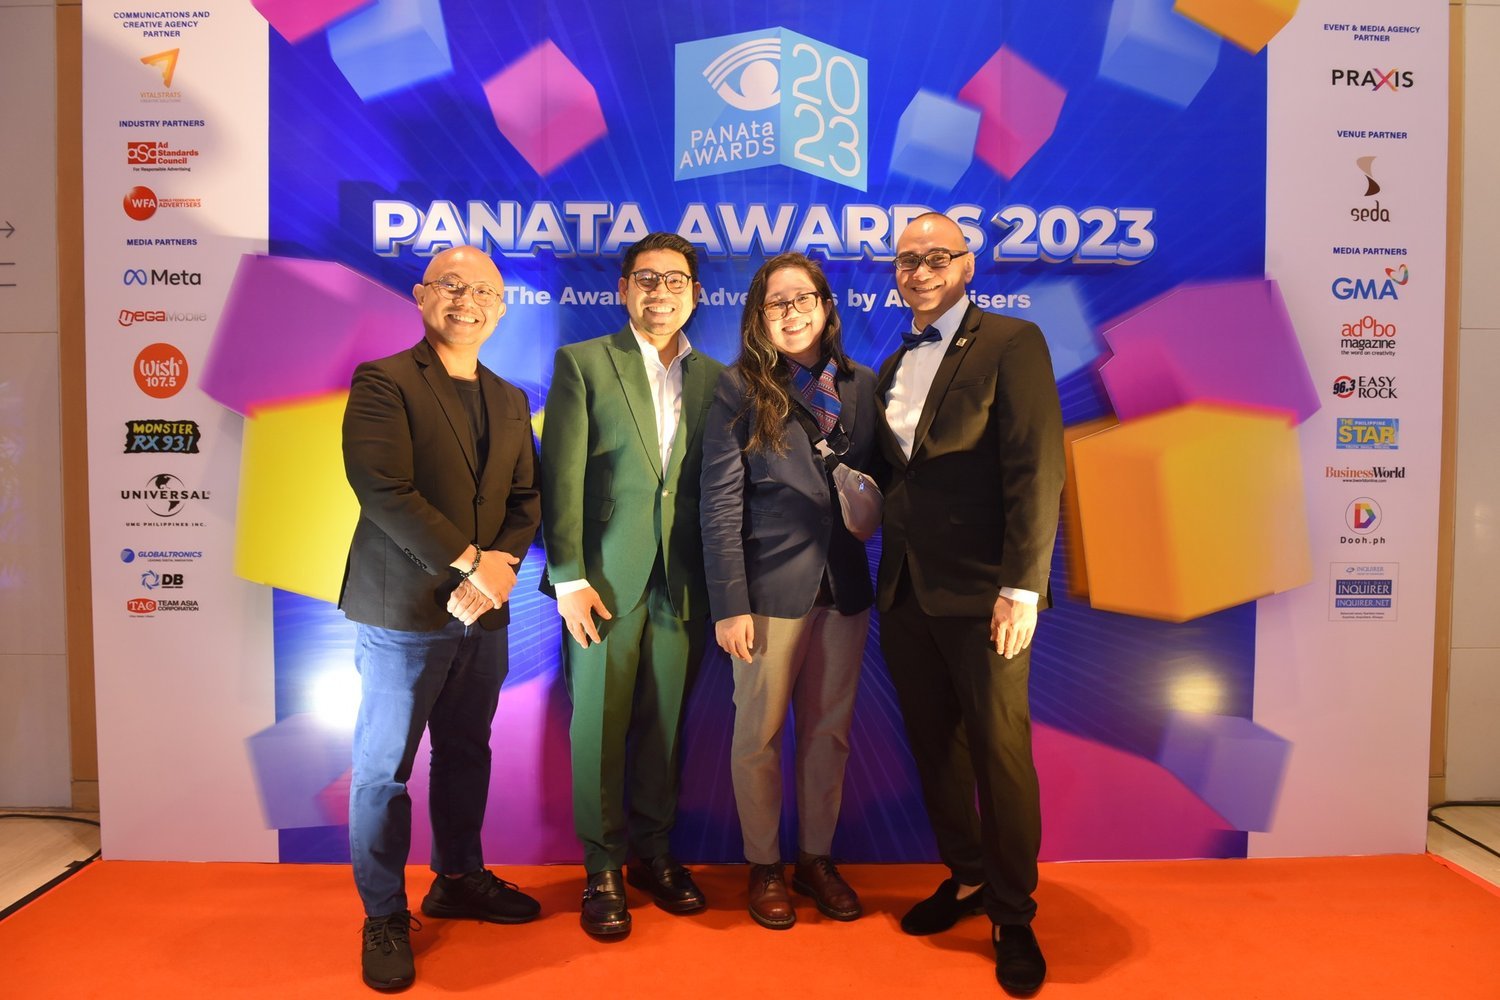 PANATA AWARDS 2023: CELEBRATING EXCELLENCE IN ADVERTISING AND MARKETING